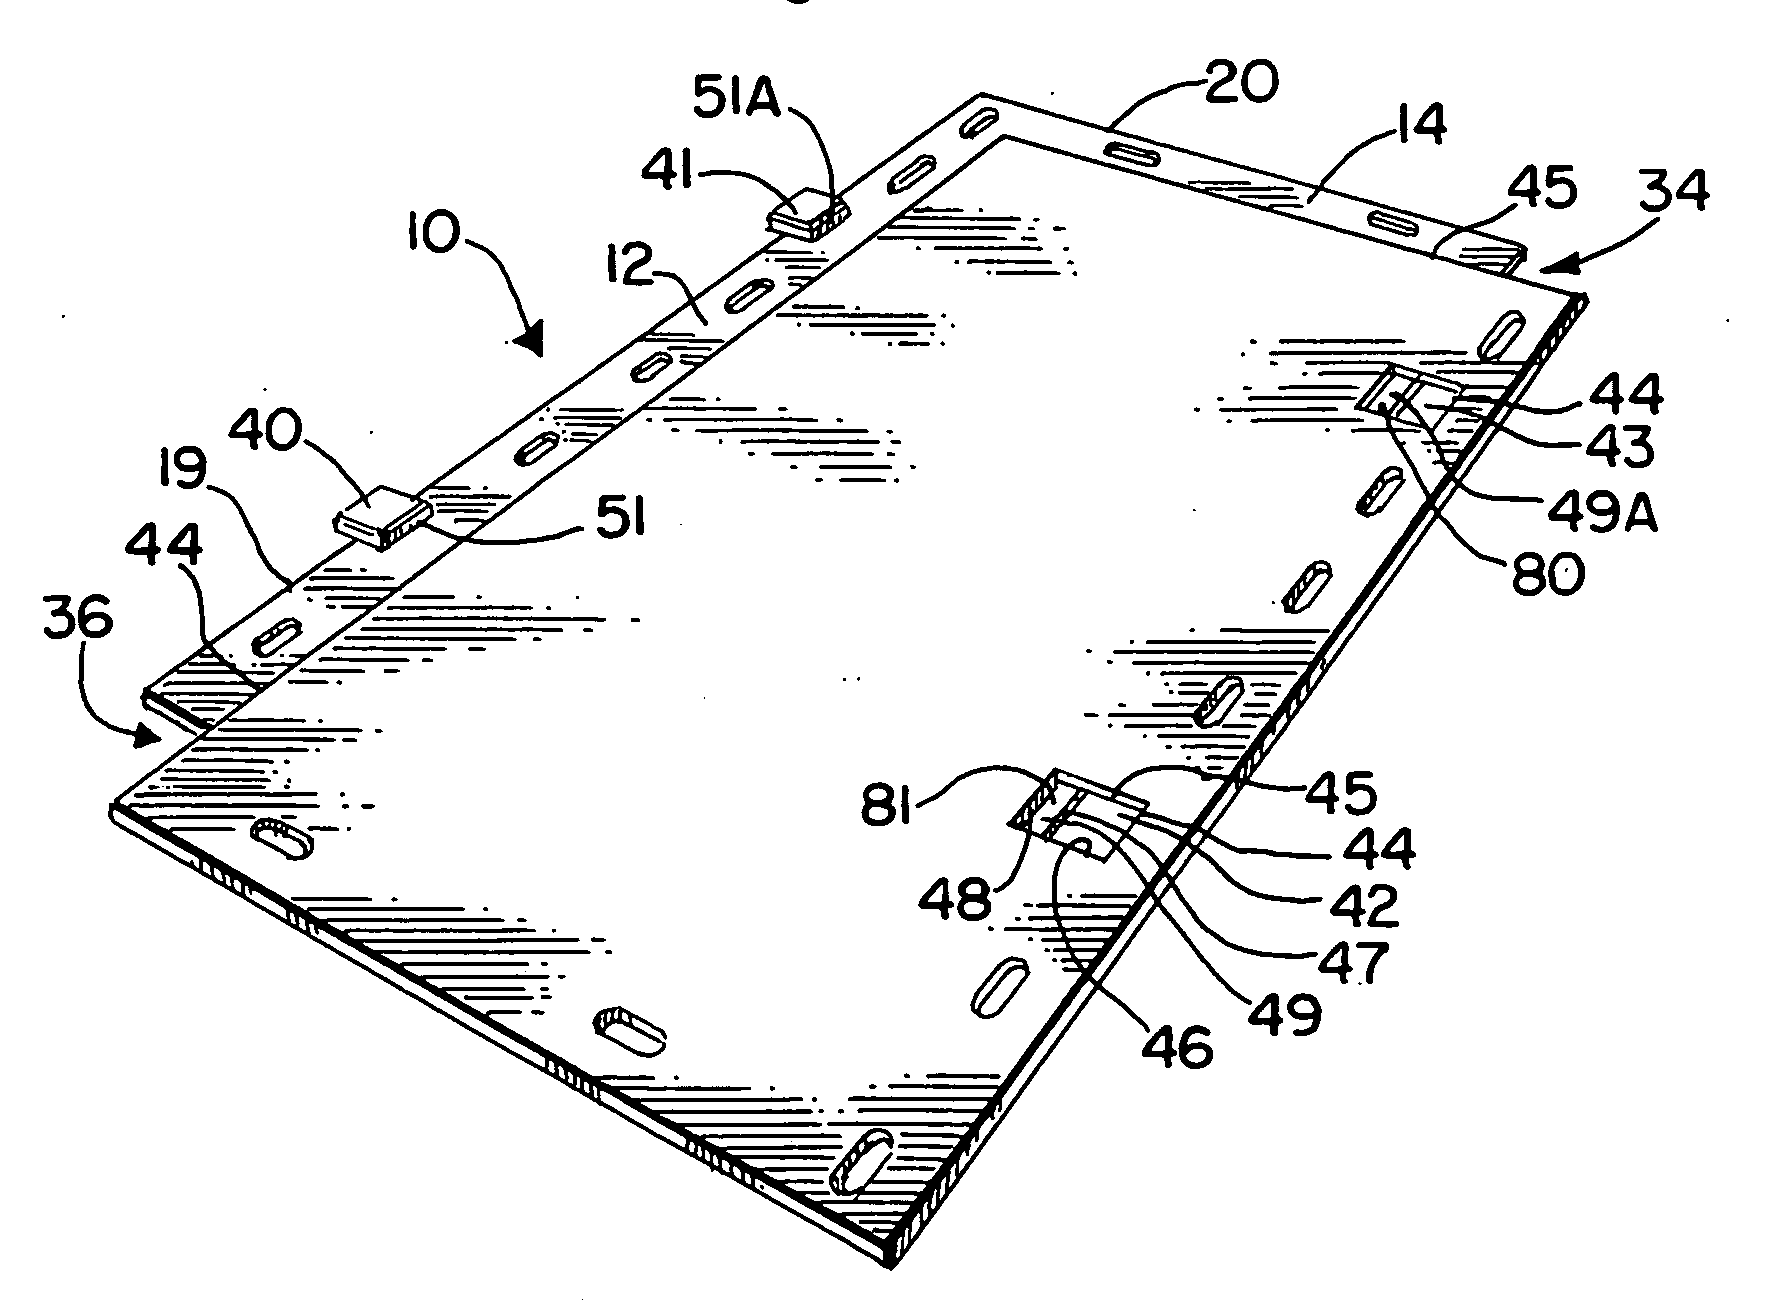 Overlapping secured mat system